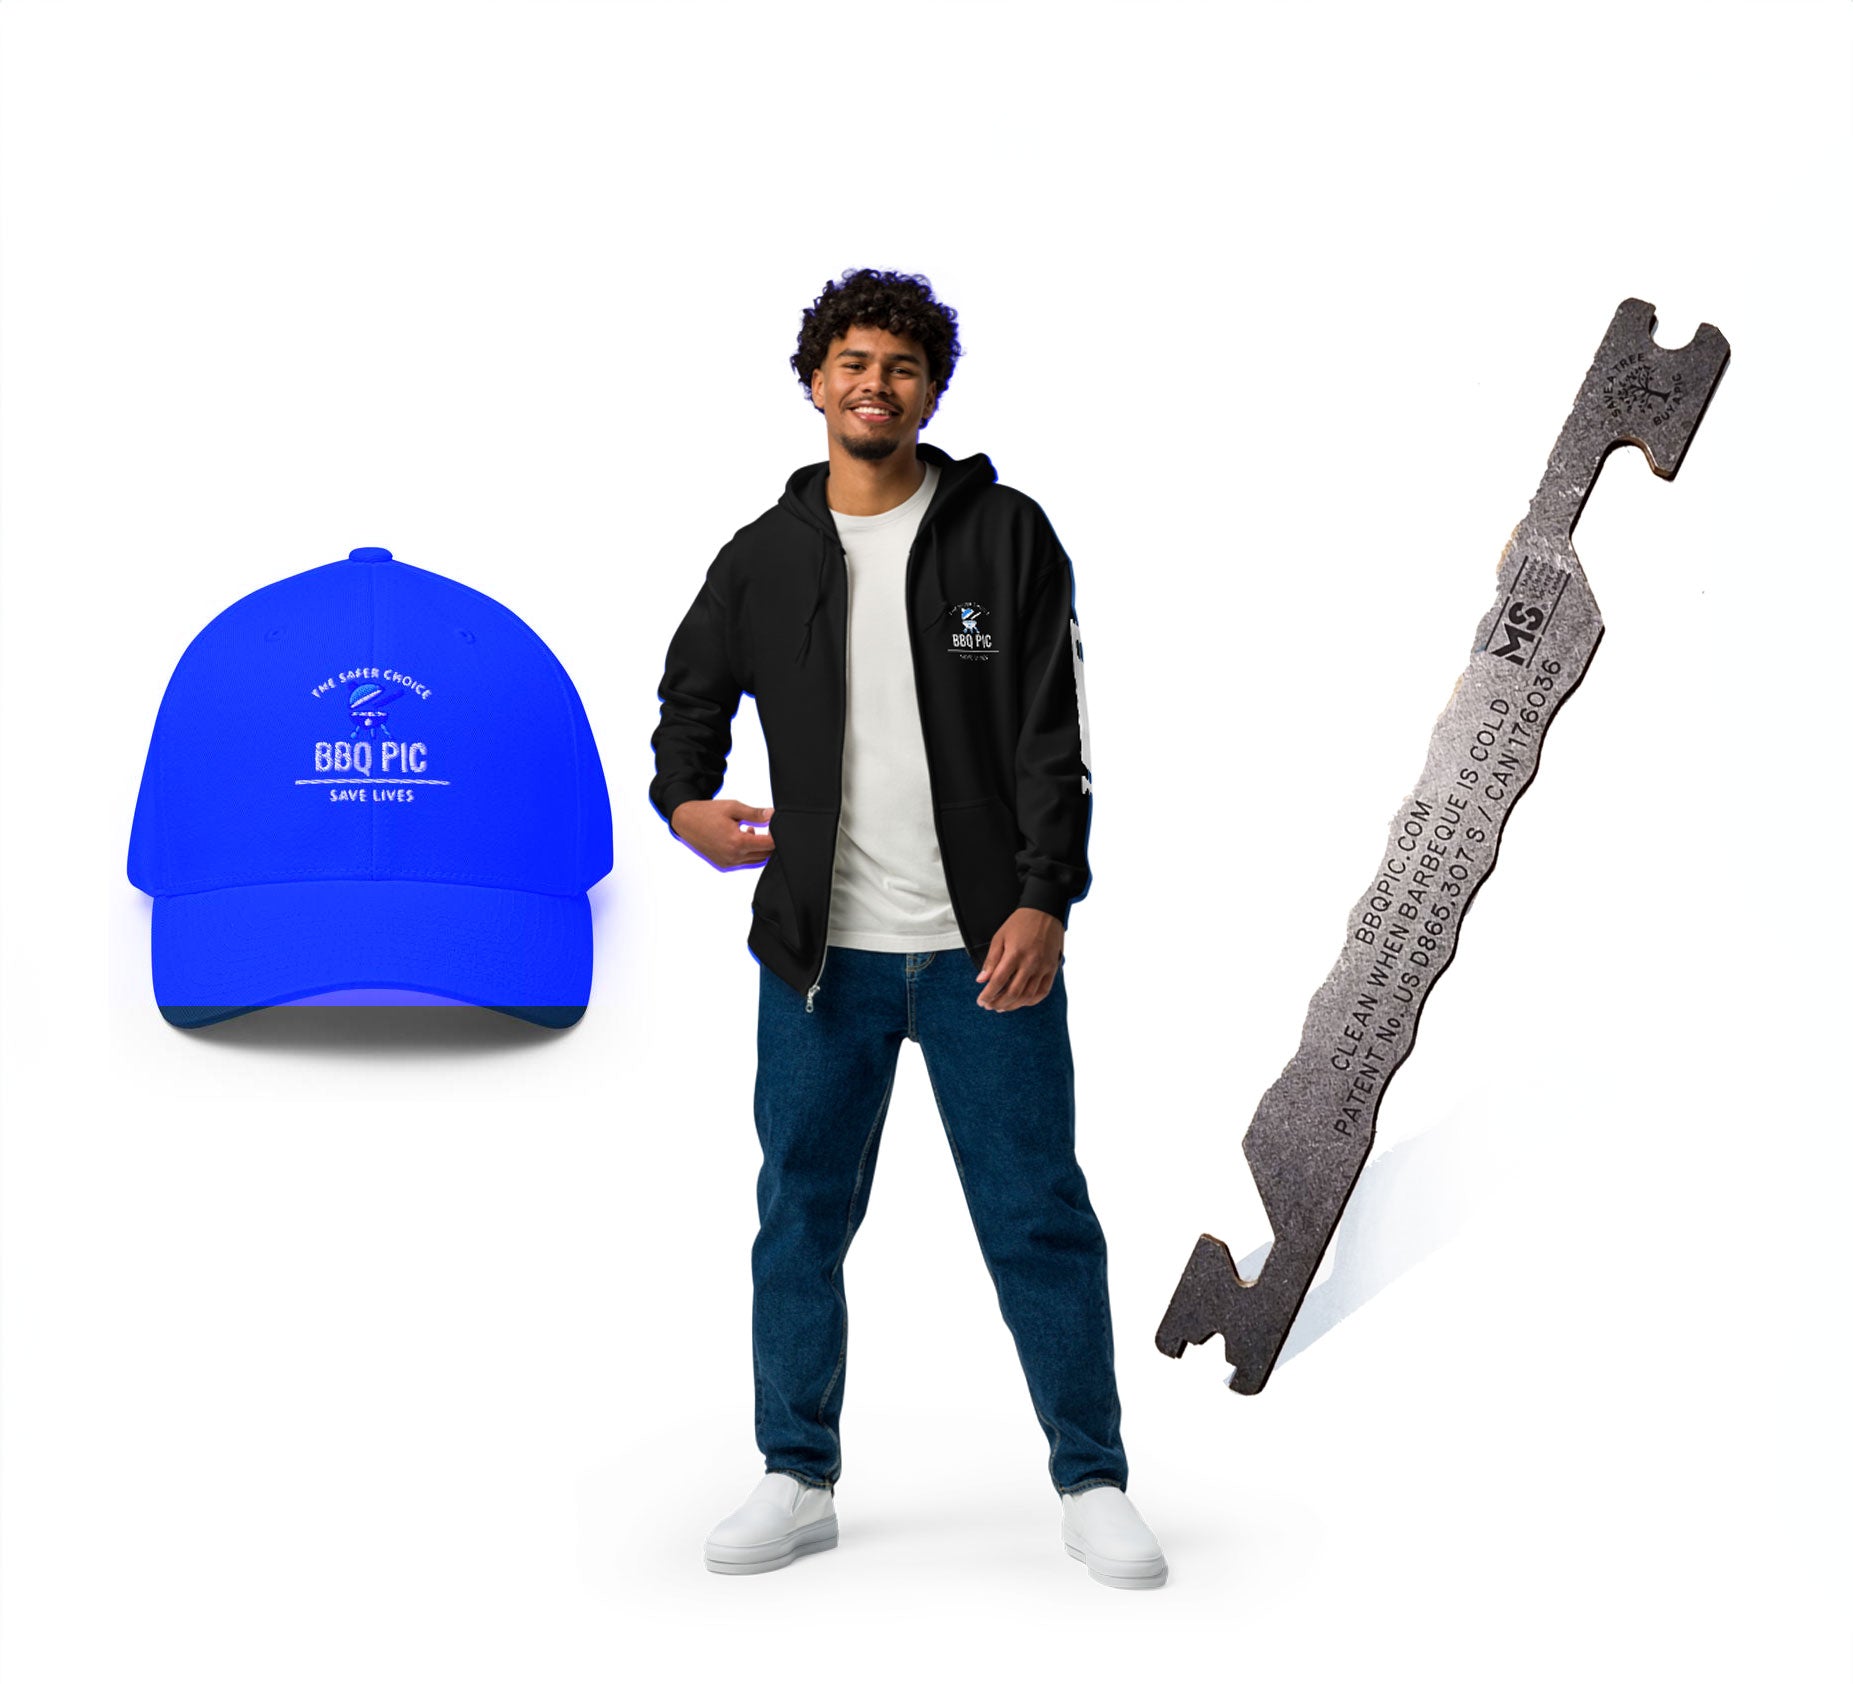 Image of the BBQ Pic Bundle where you save money which includes a BBQ Pic hat, Hoody and BBQ Pic Grill Scraper. Hoodie is black.